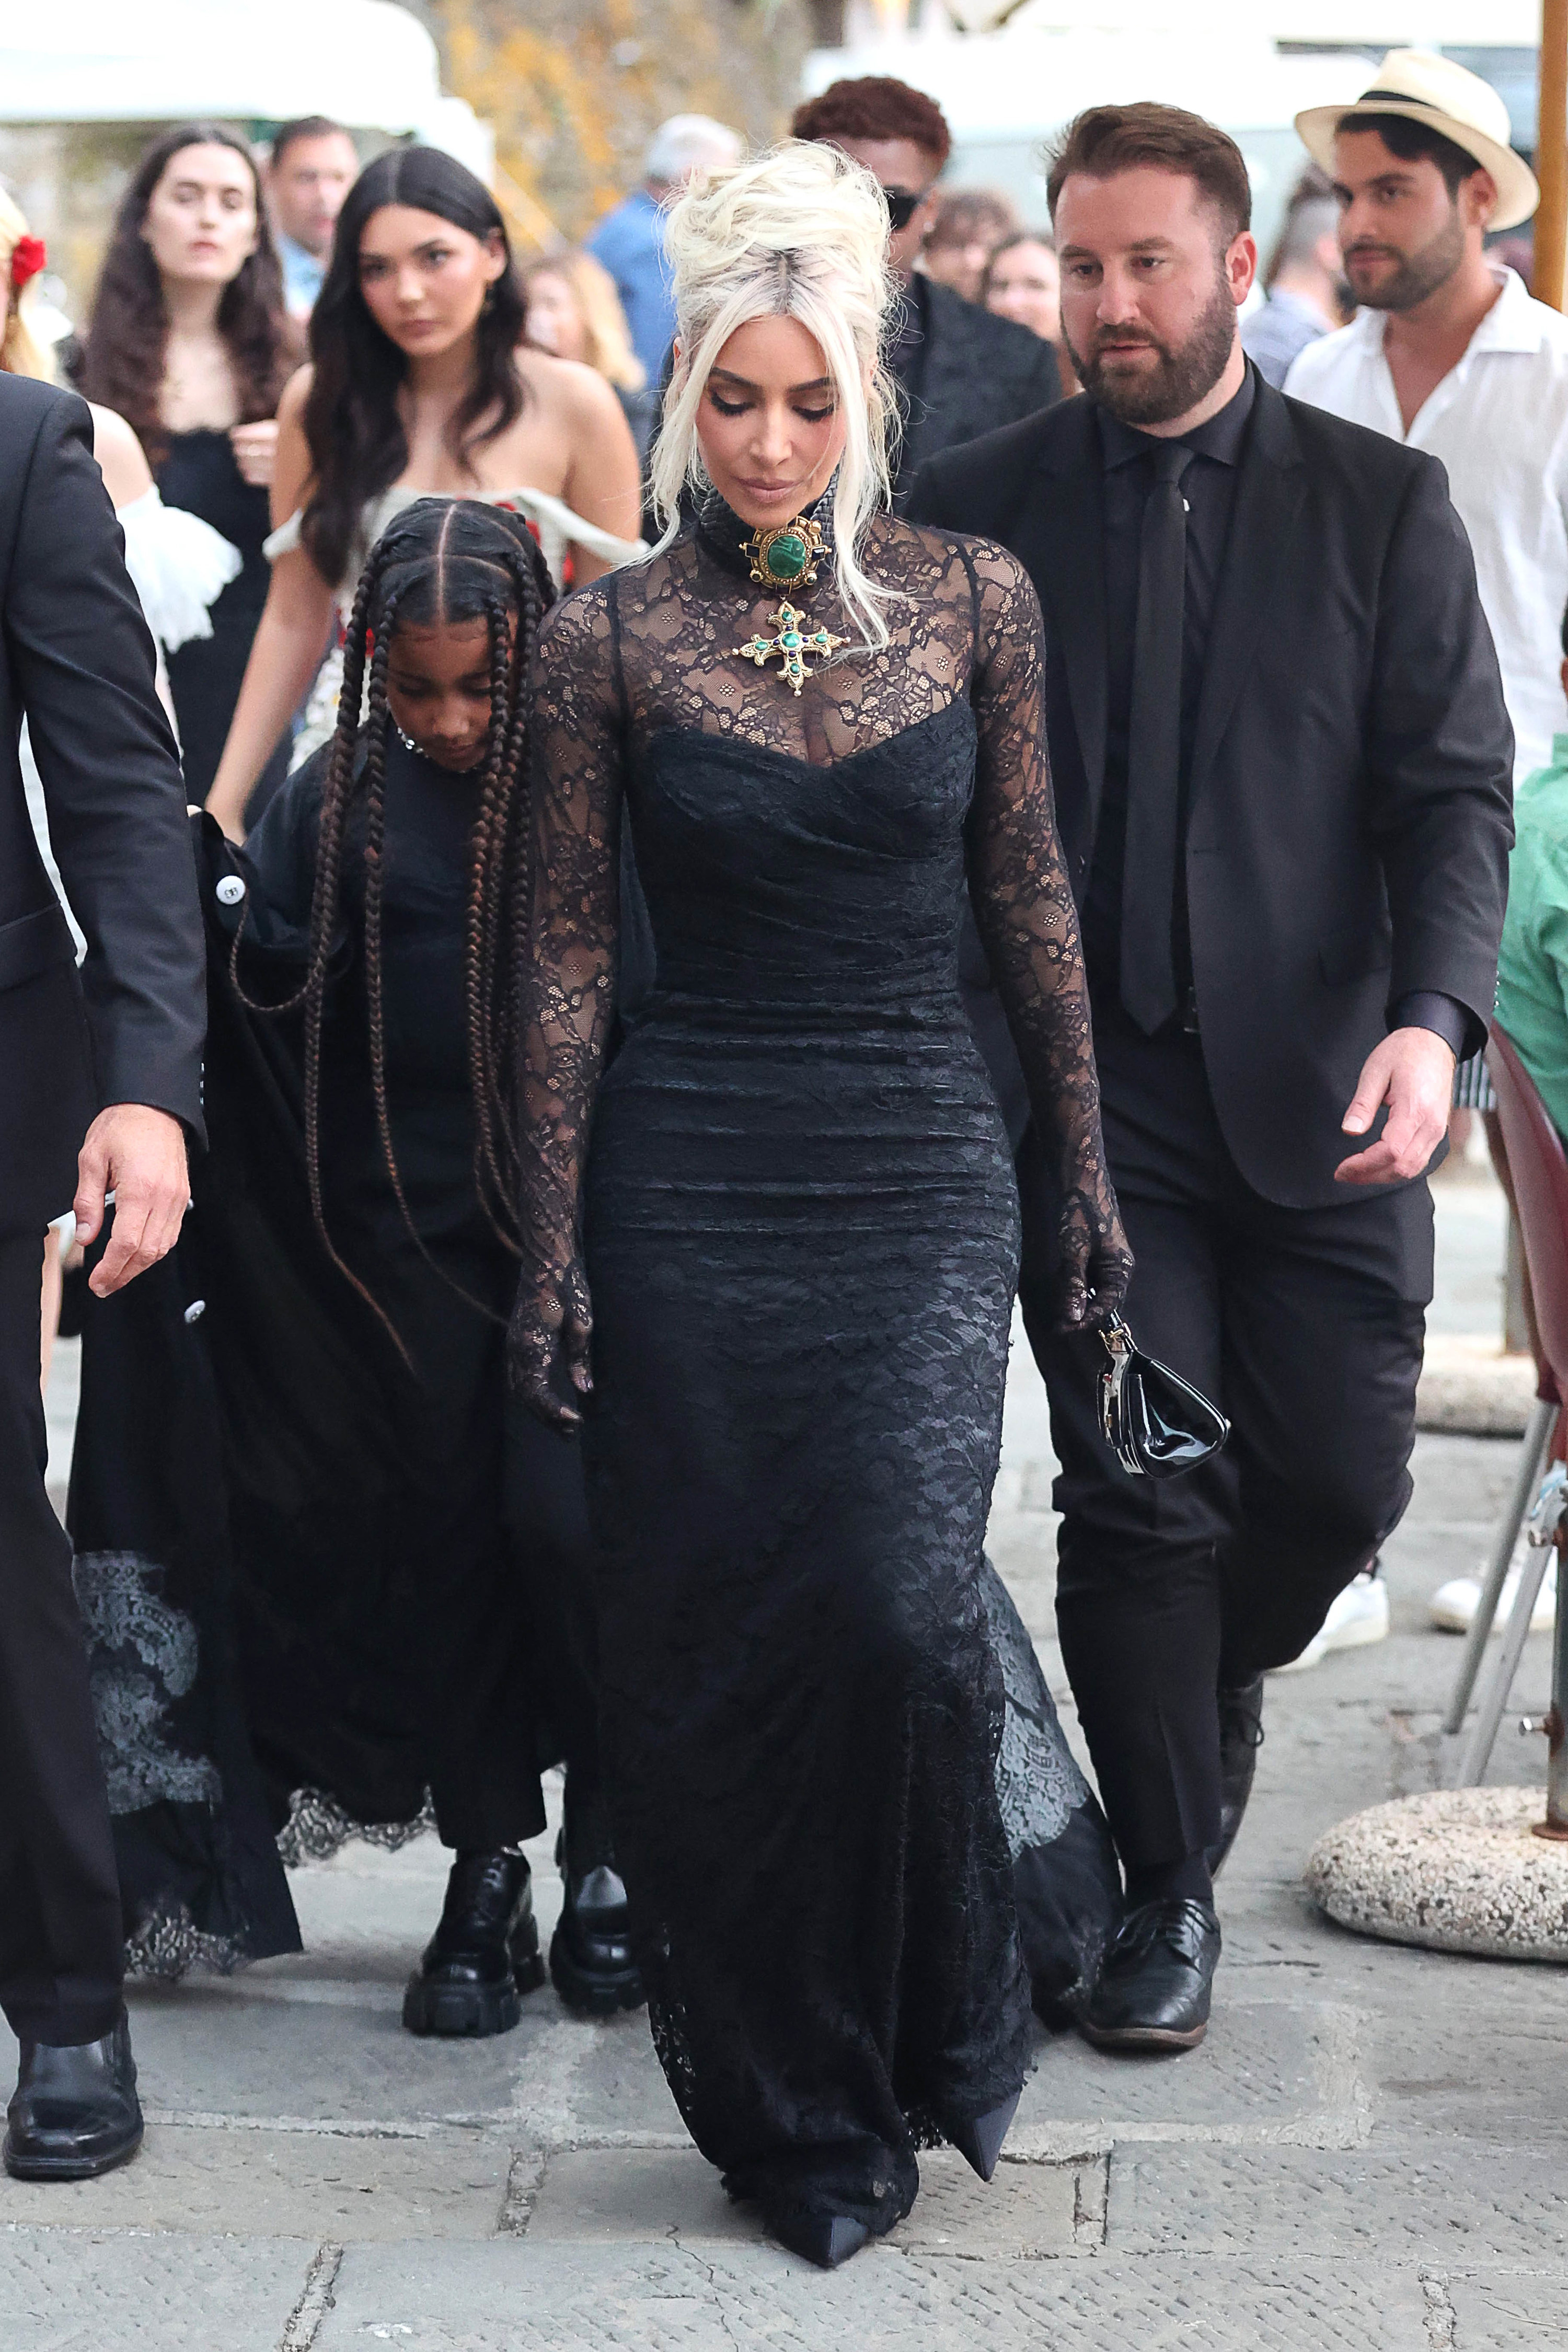 Kim on the street with a crowd and wearing a lacy gown